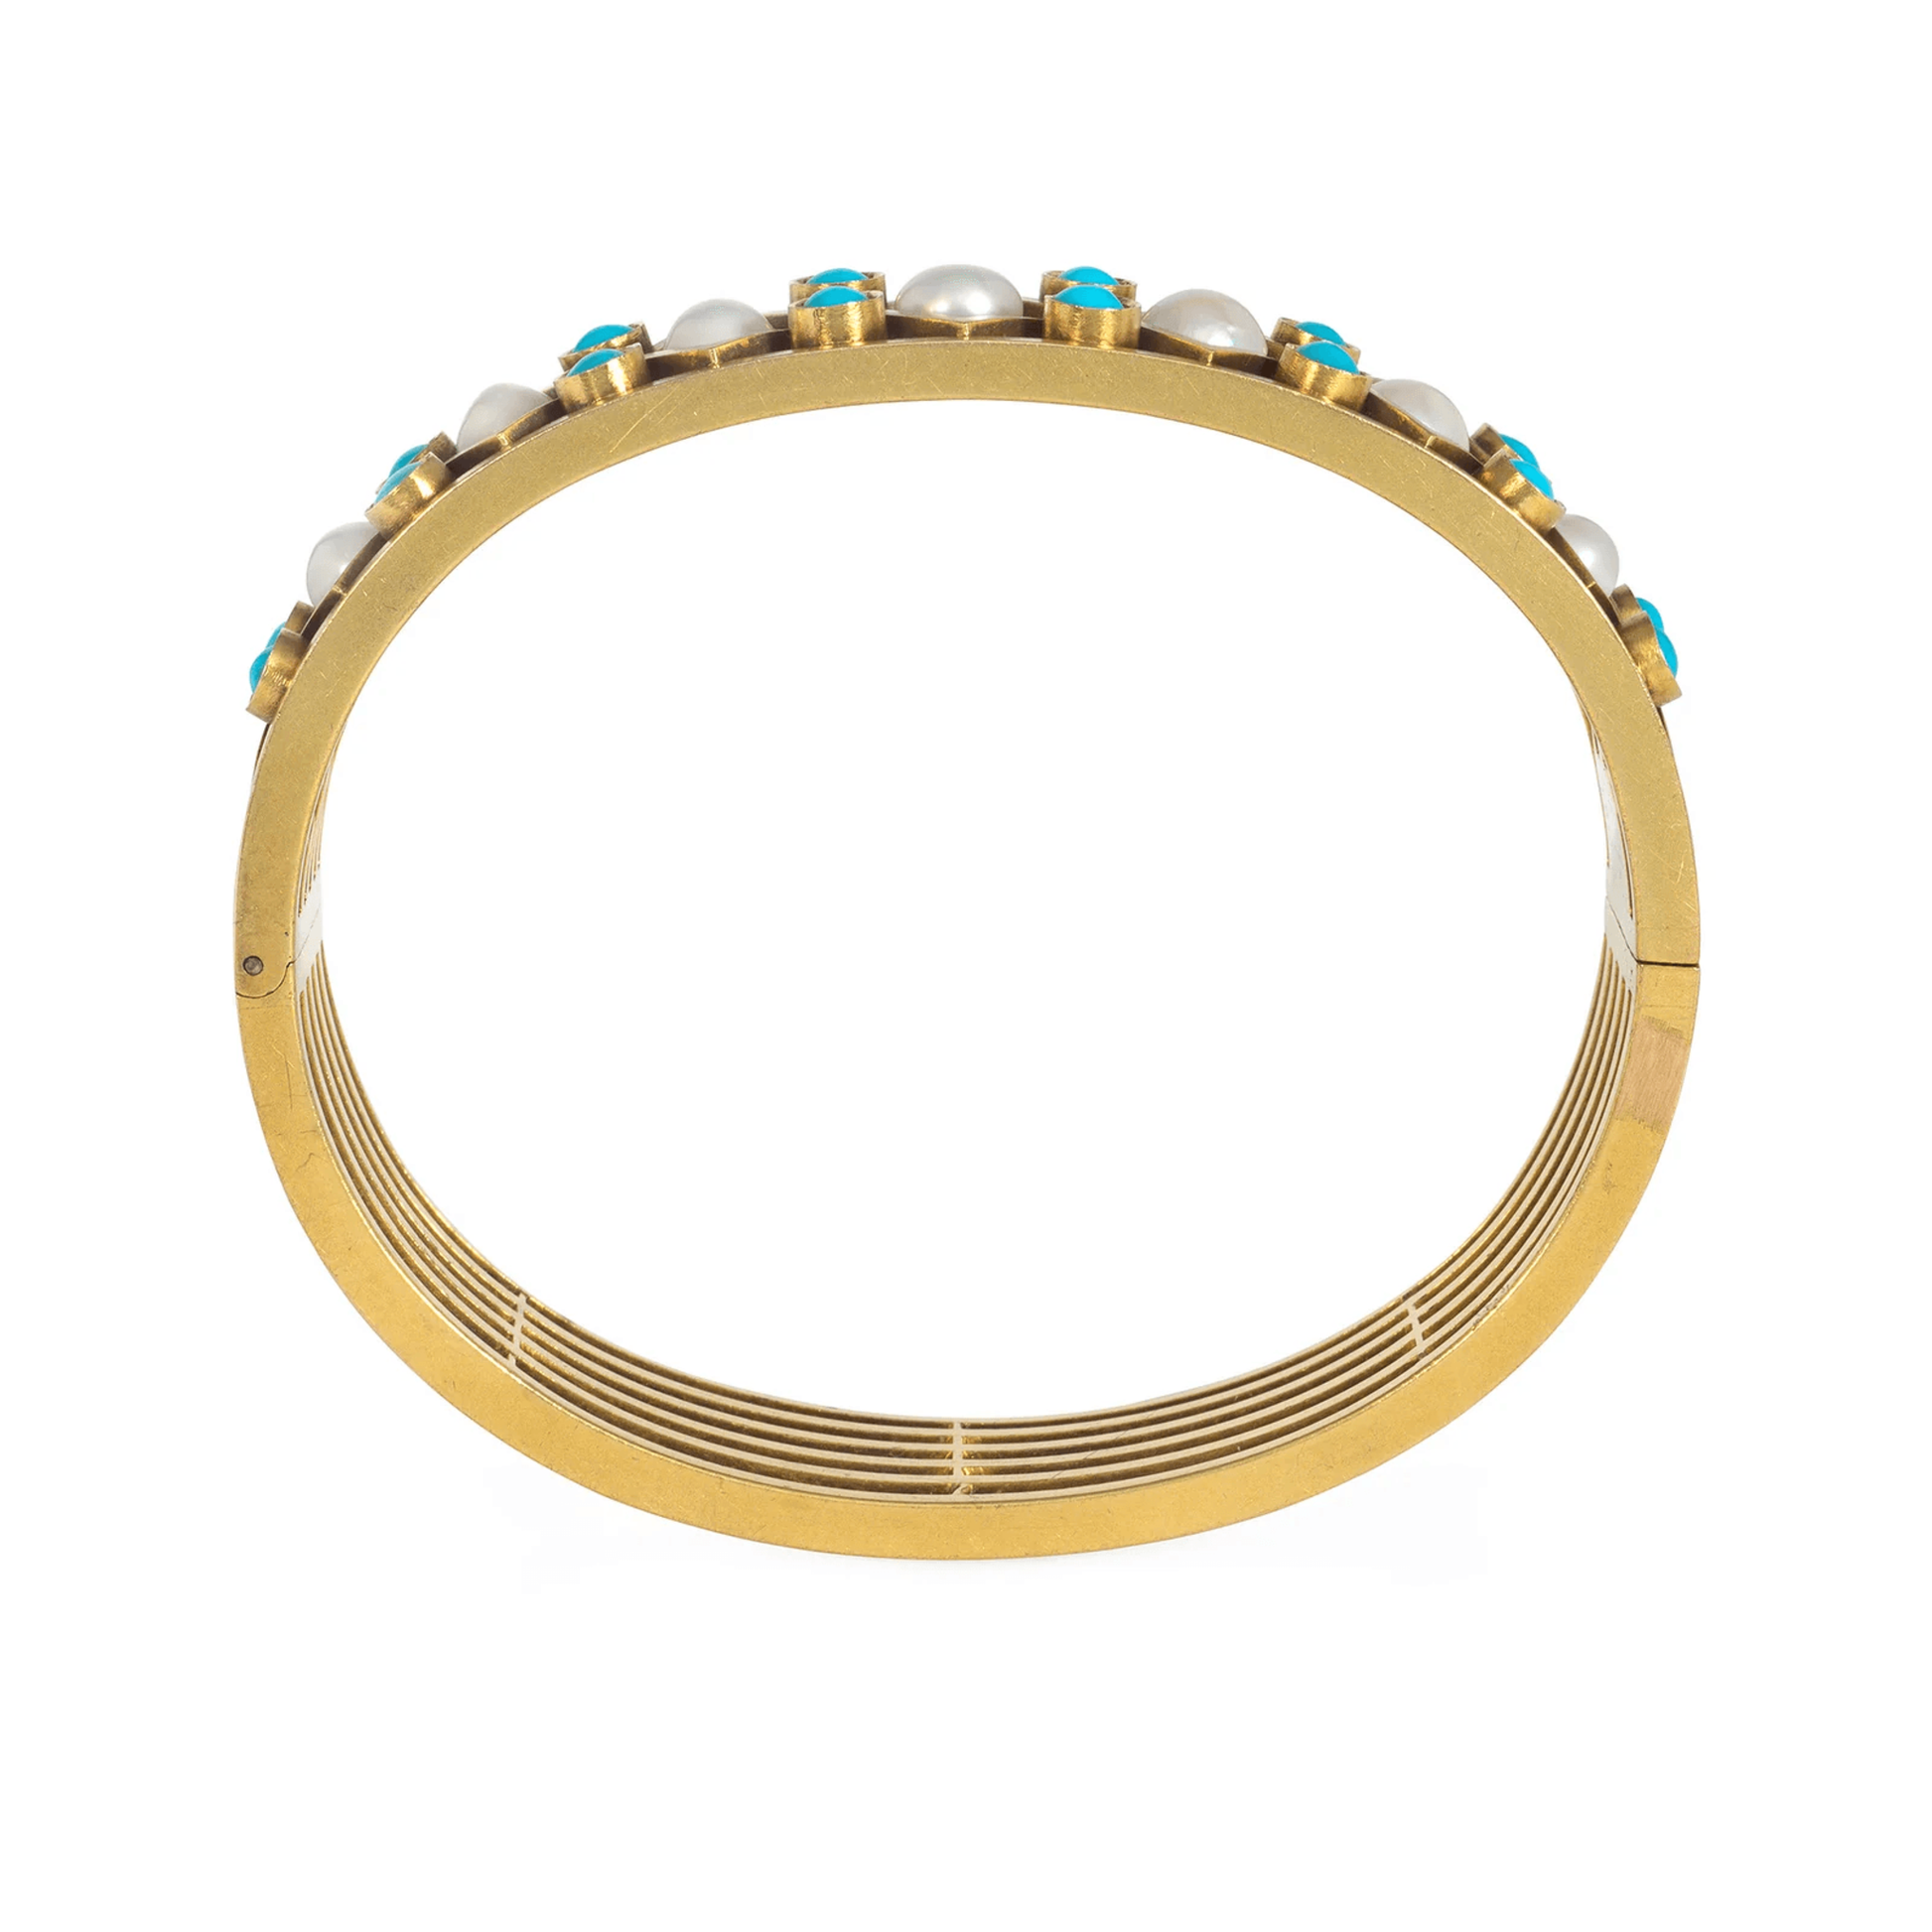 Russian Antique 14KT Yellow Gold Turquoise & Natural Pearl Bangle Bracelet profile